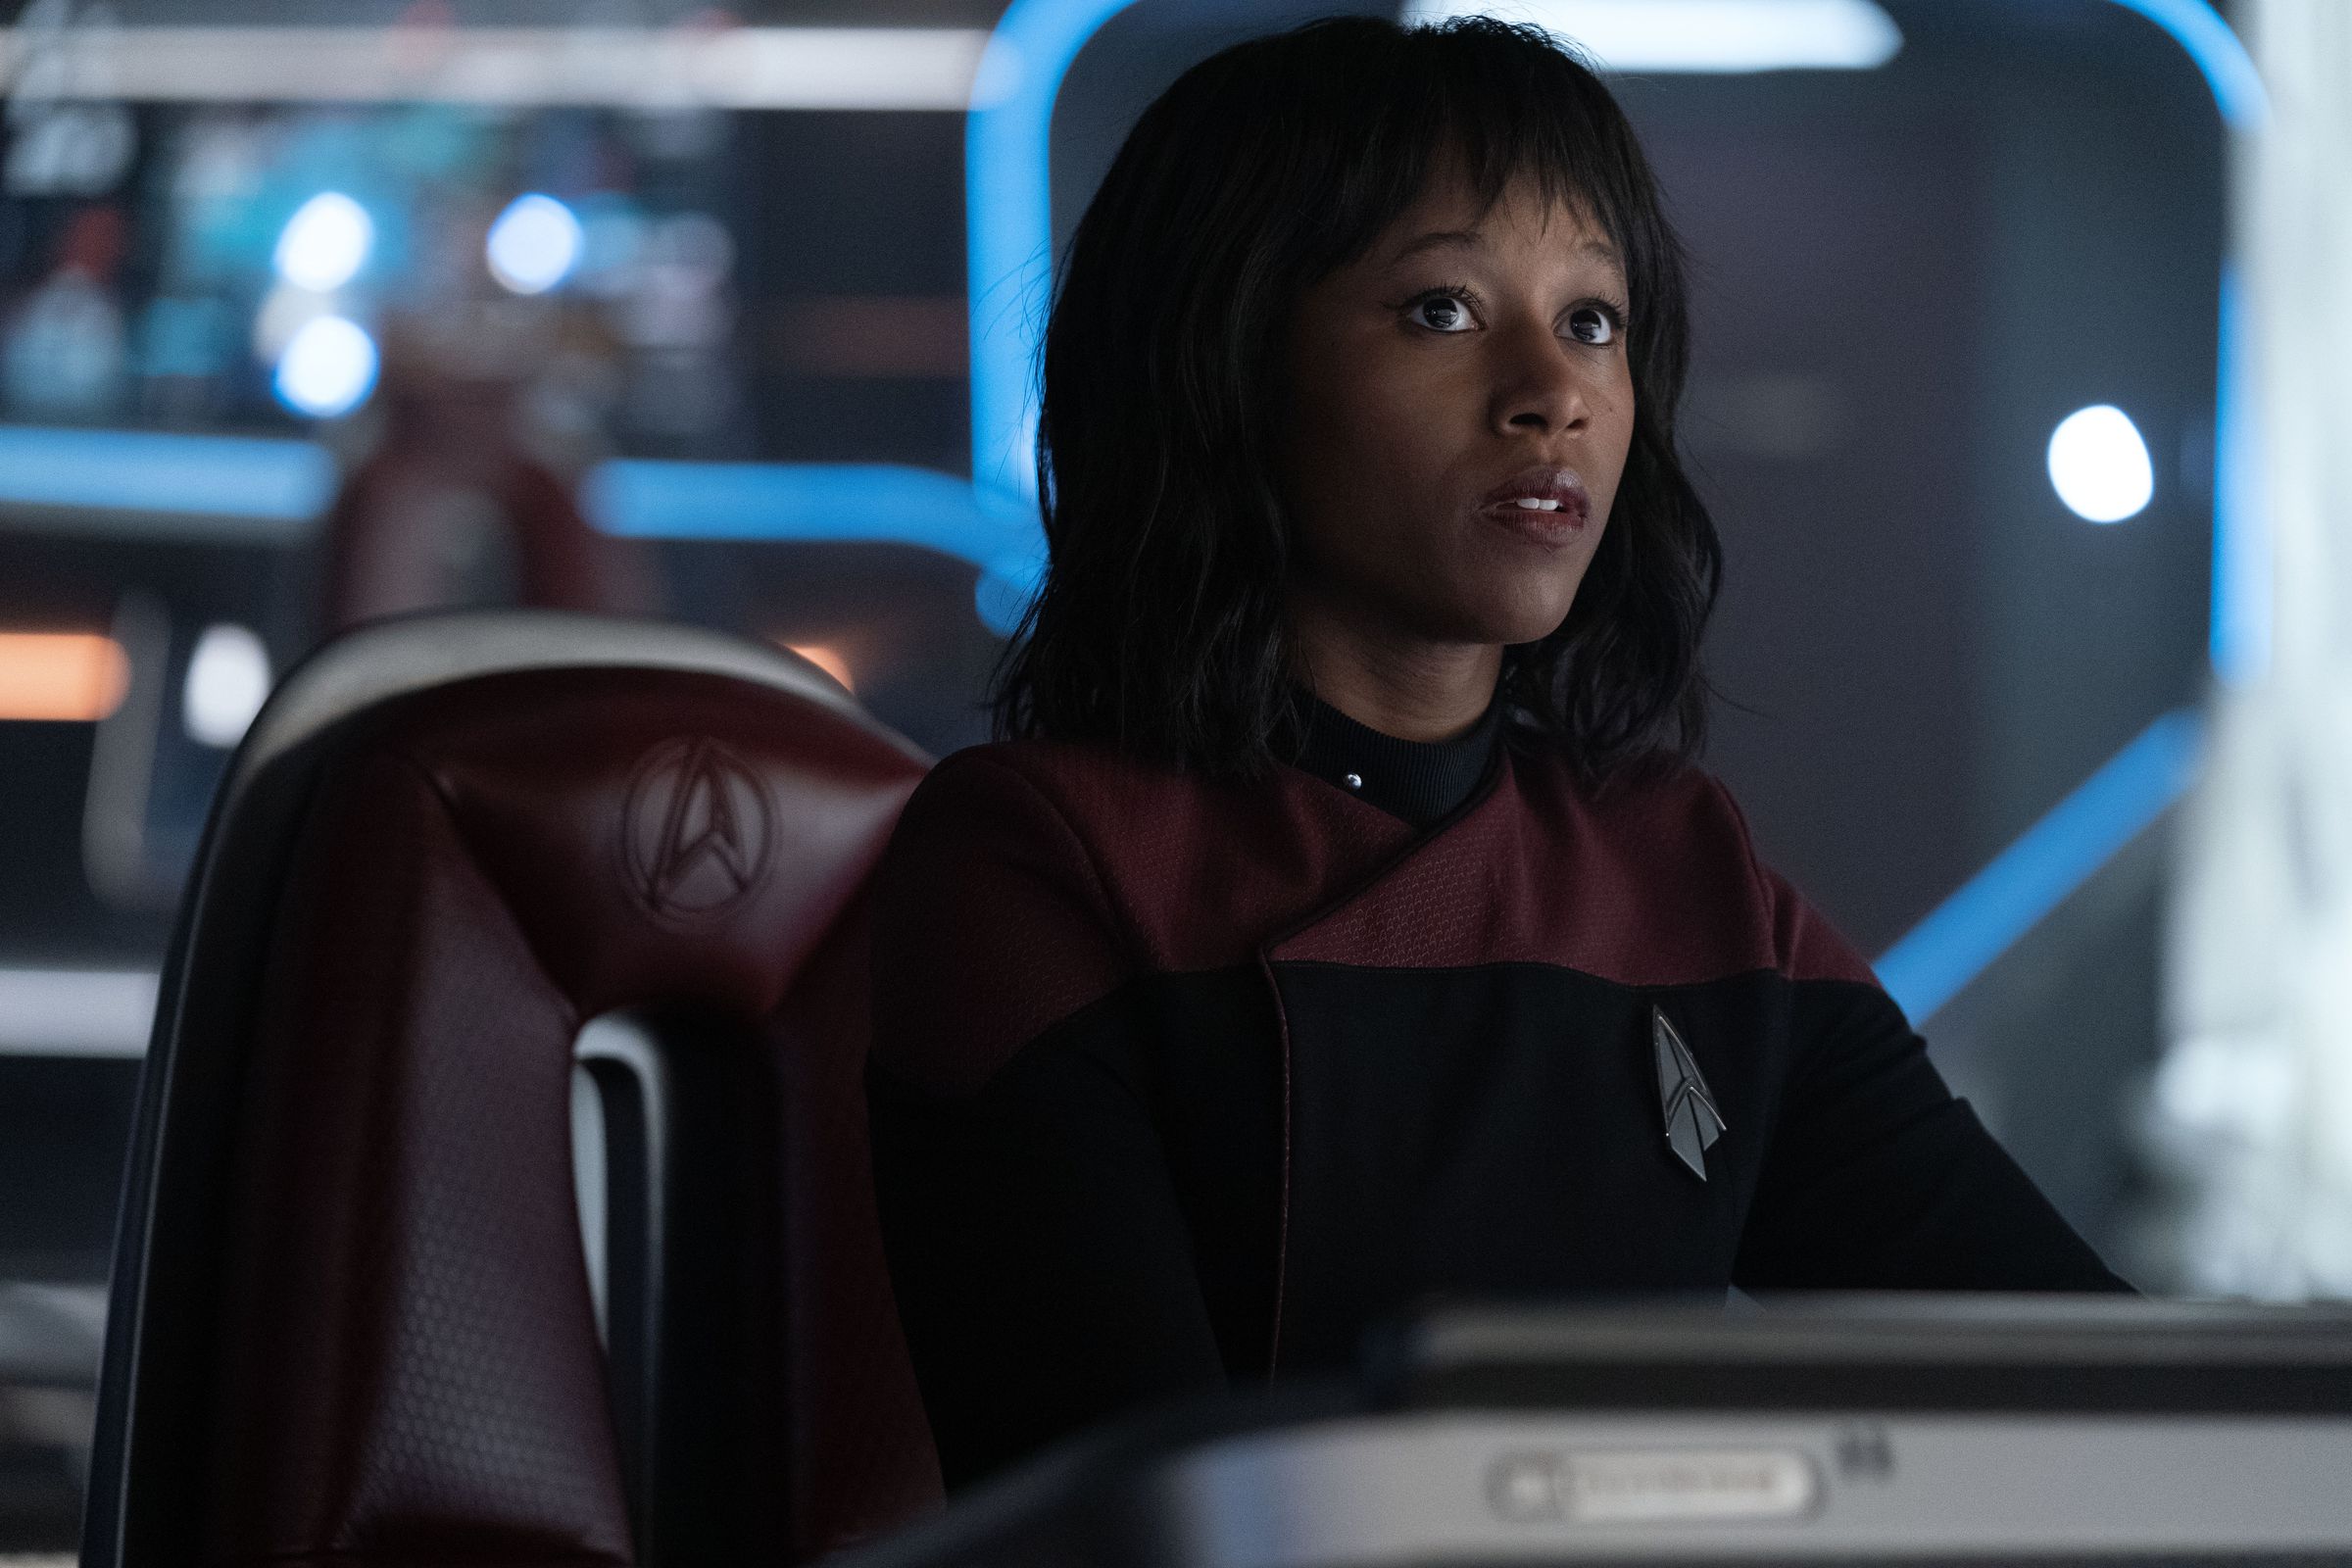 A young Black woman dressed in a Starfleet uniform stares at something off screen with concern.